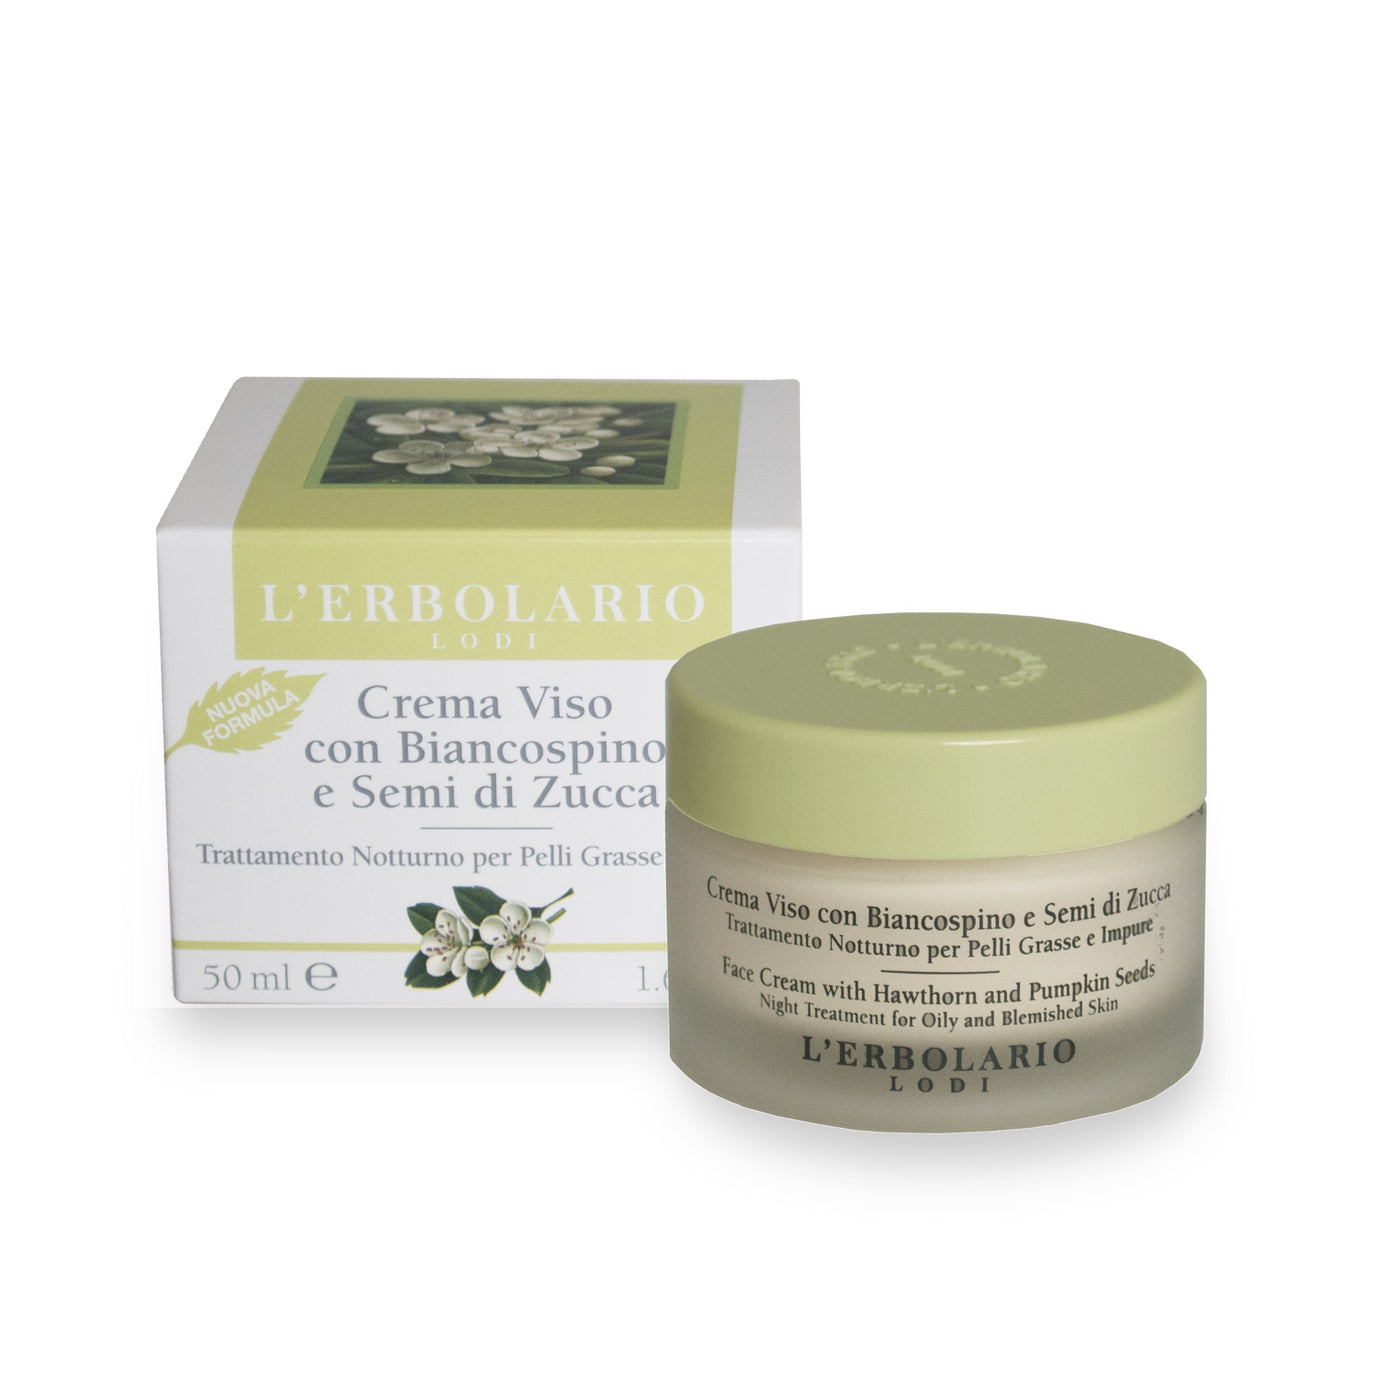 Hawthorn and Pumpkin Seeds Night Cream for Oily and Blemished Skin 50 ml -  organic-lab-my.myshopify.com